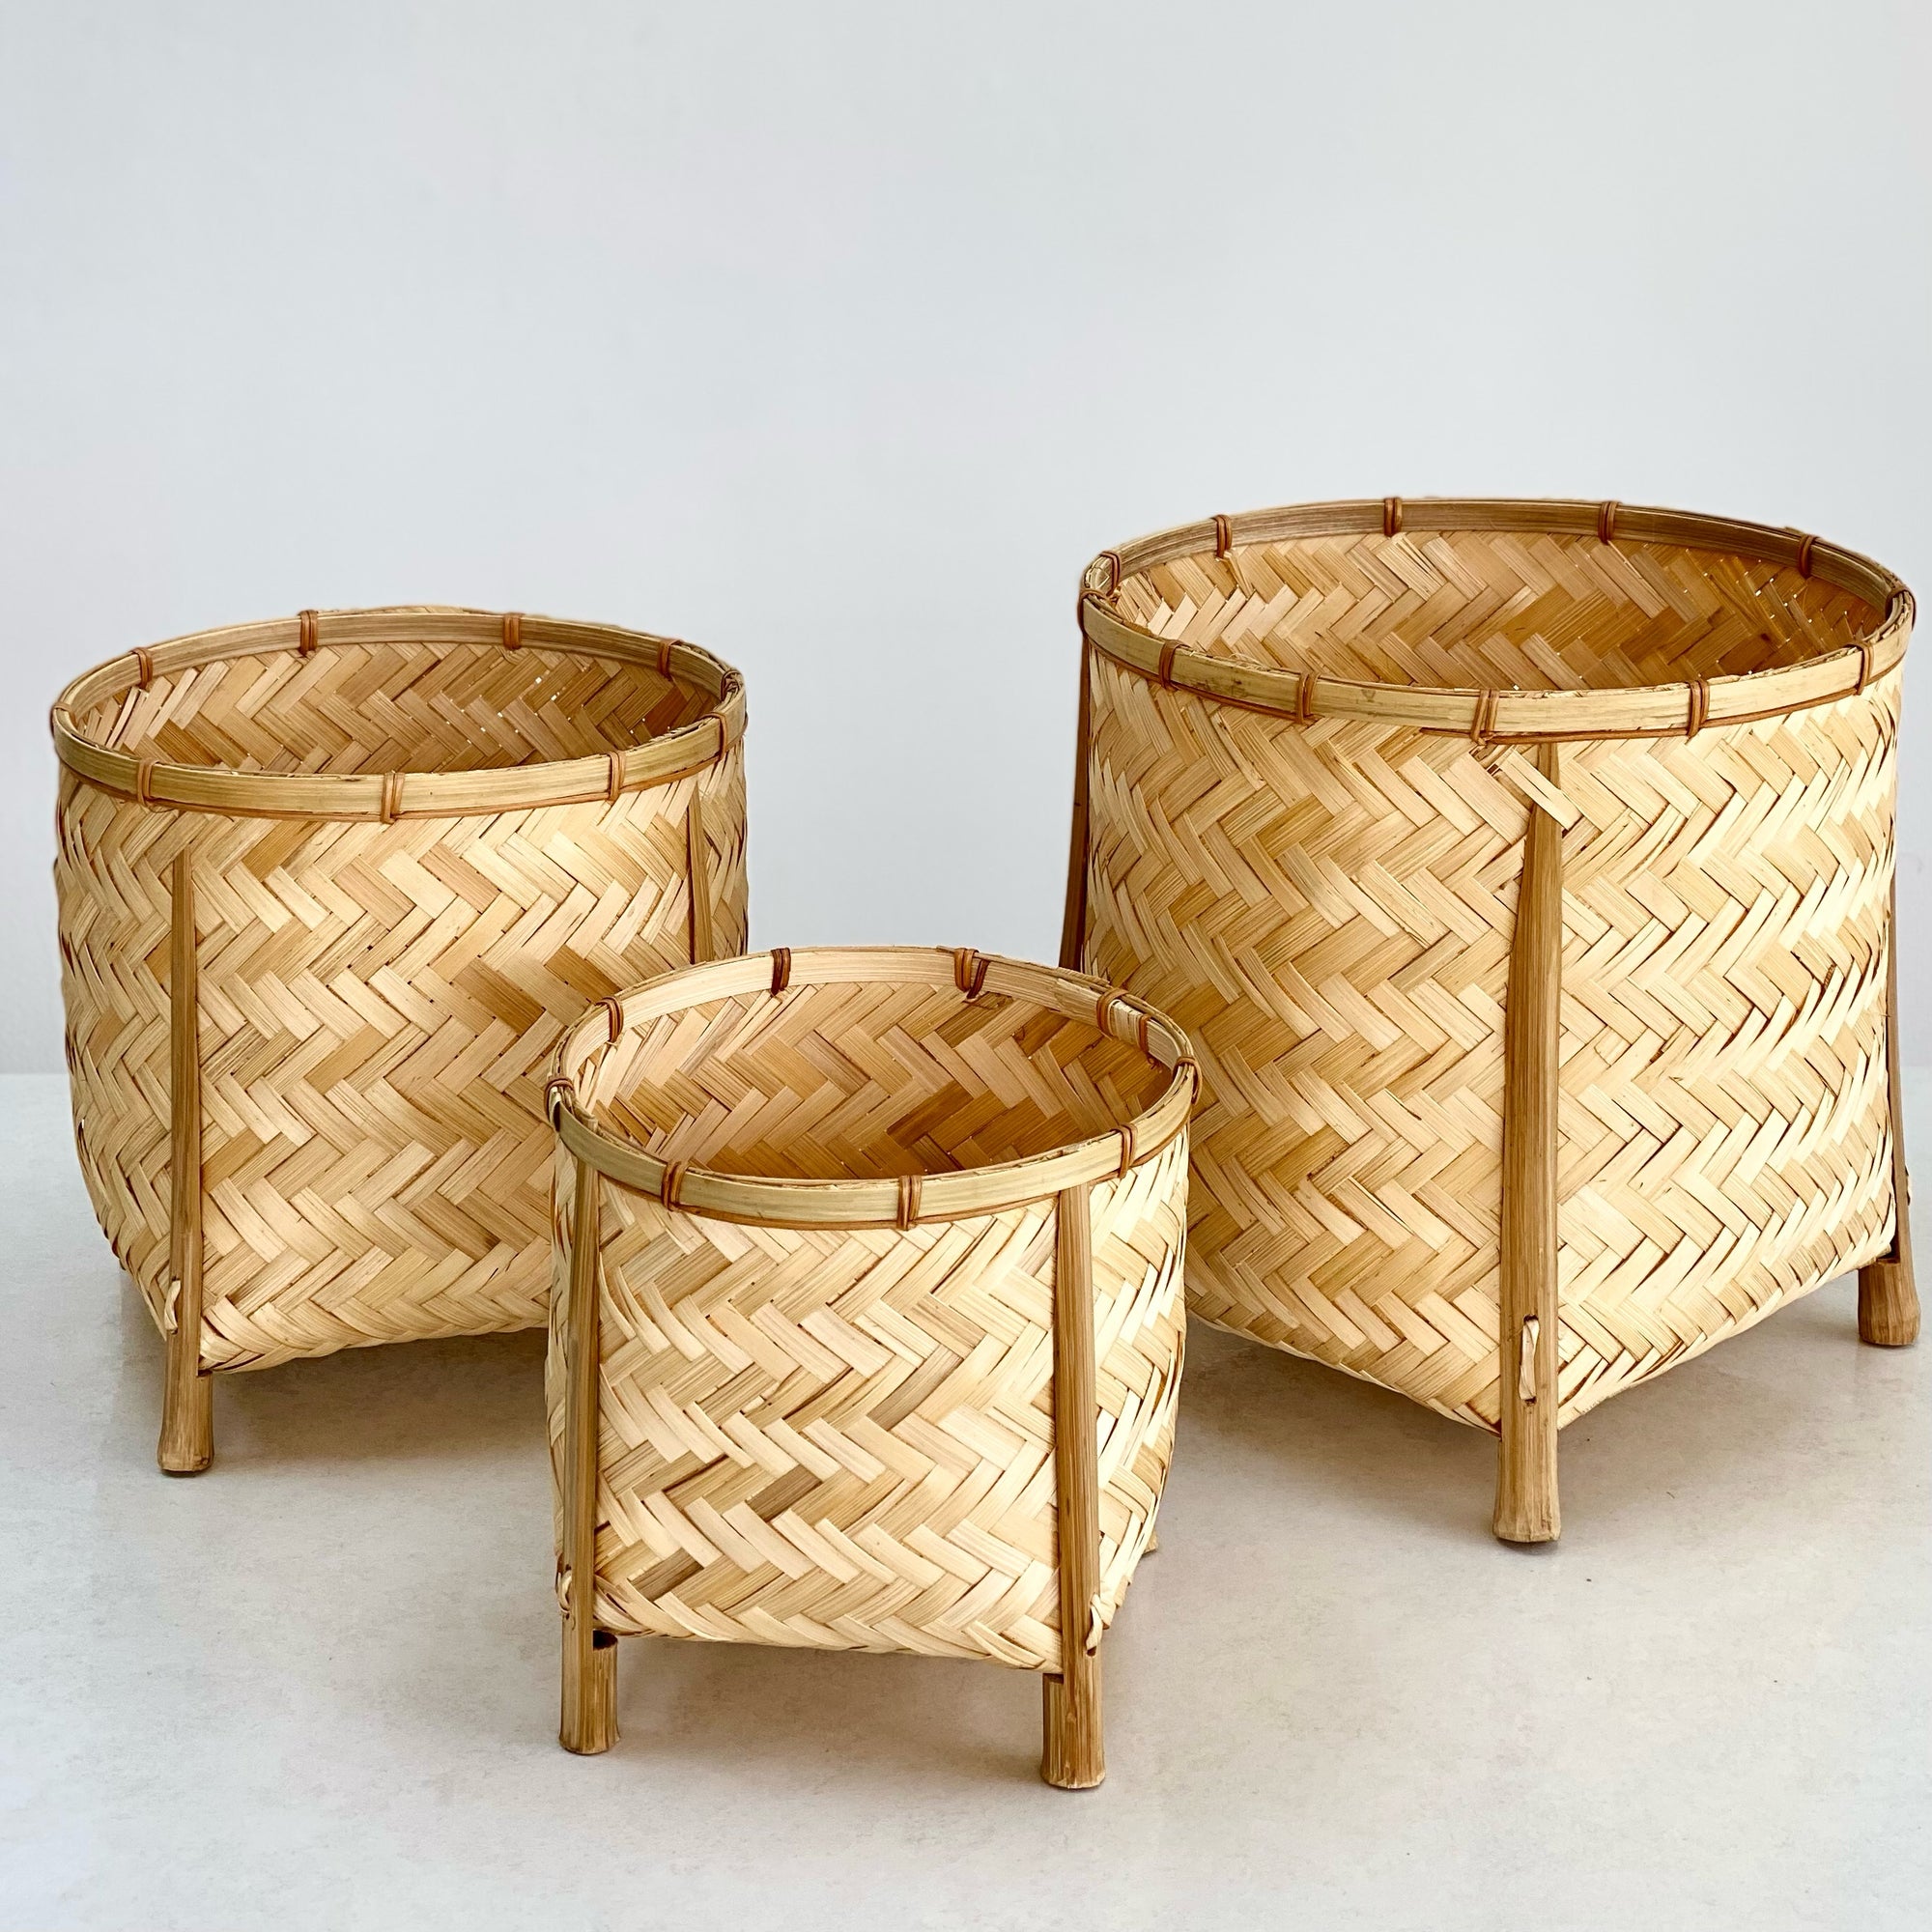 Handcrafted Bamboo Planter